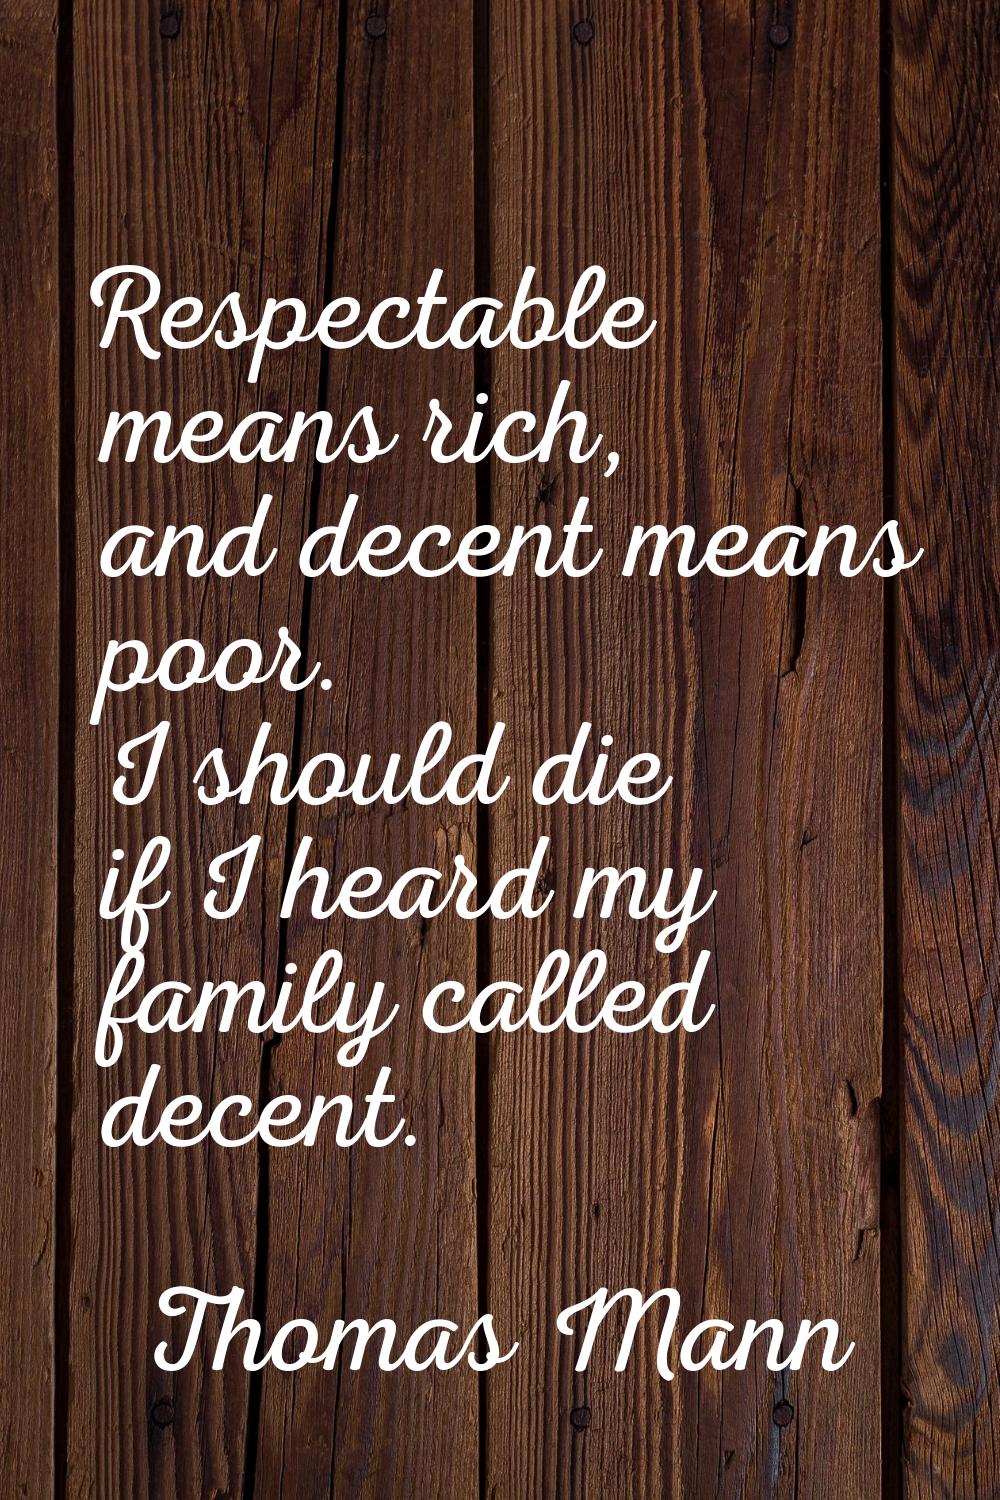 Respectable means rich, and decent means poor. I should die if I heard my family called decent.